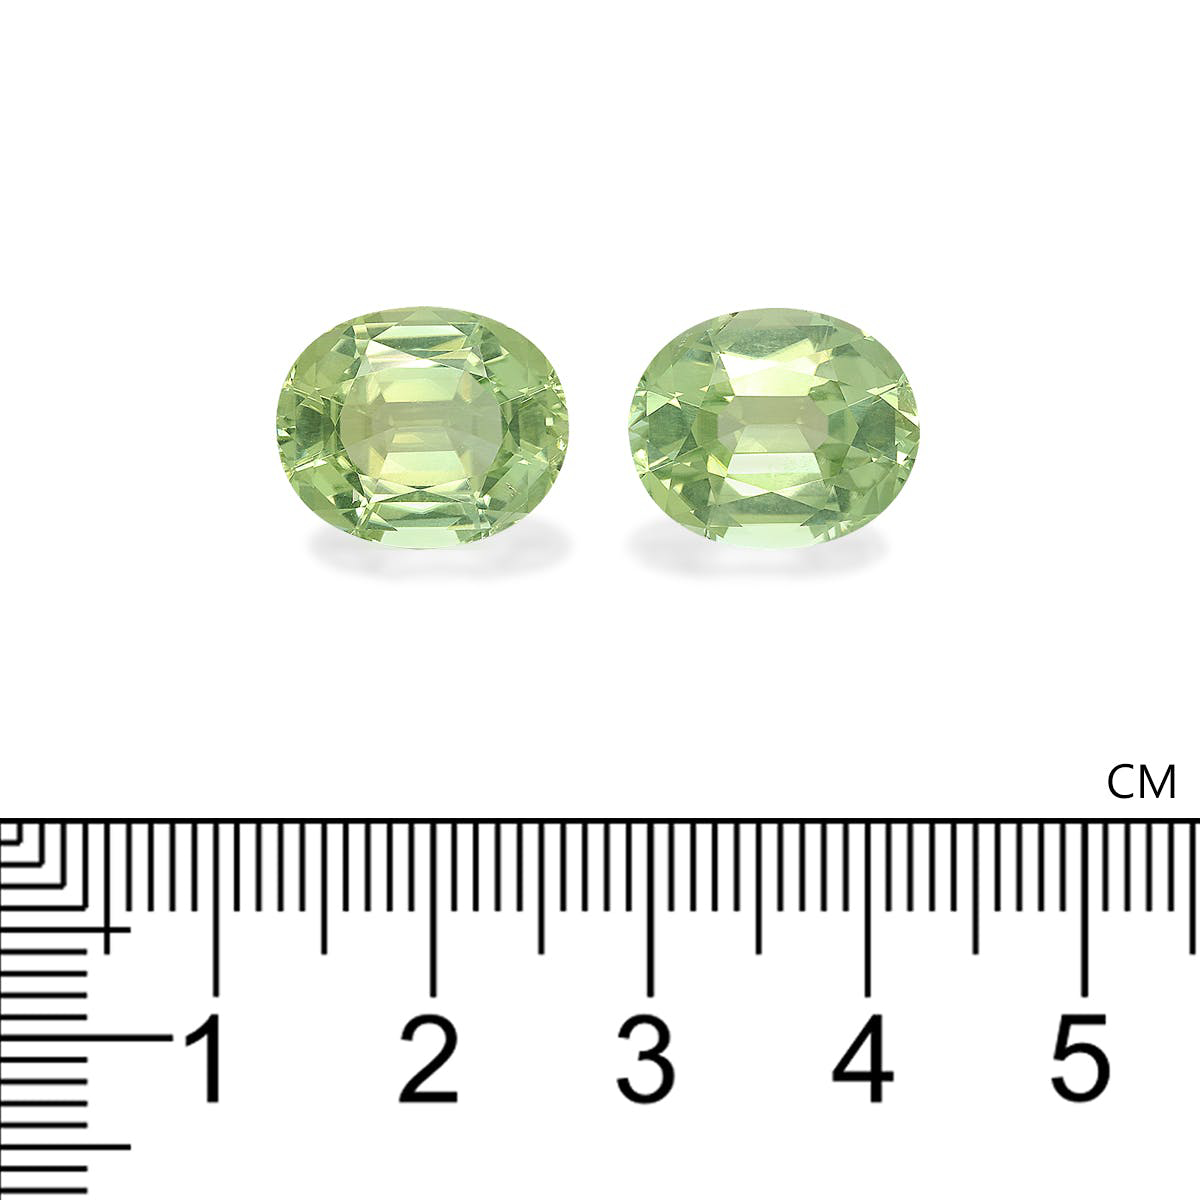 Picture of Pale Green Tourmaline 13.42ct - 13x11mm Pair (TG1367)